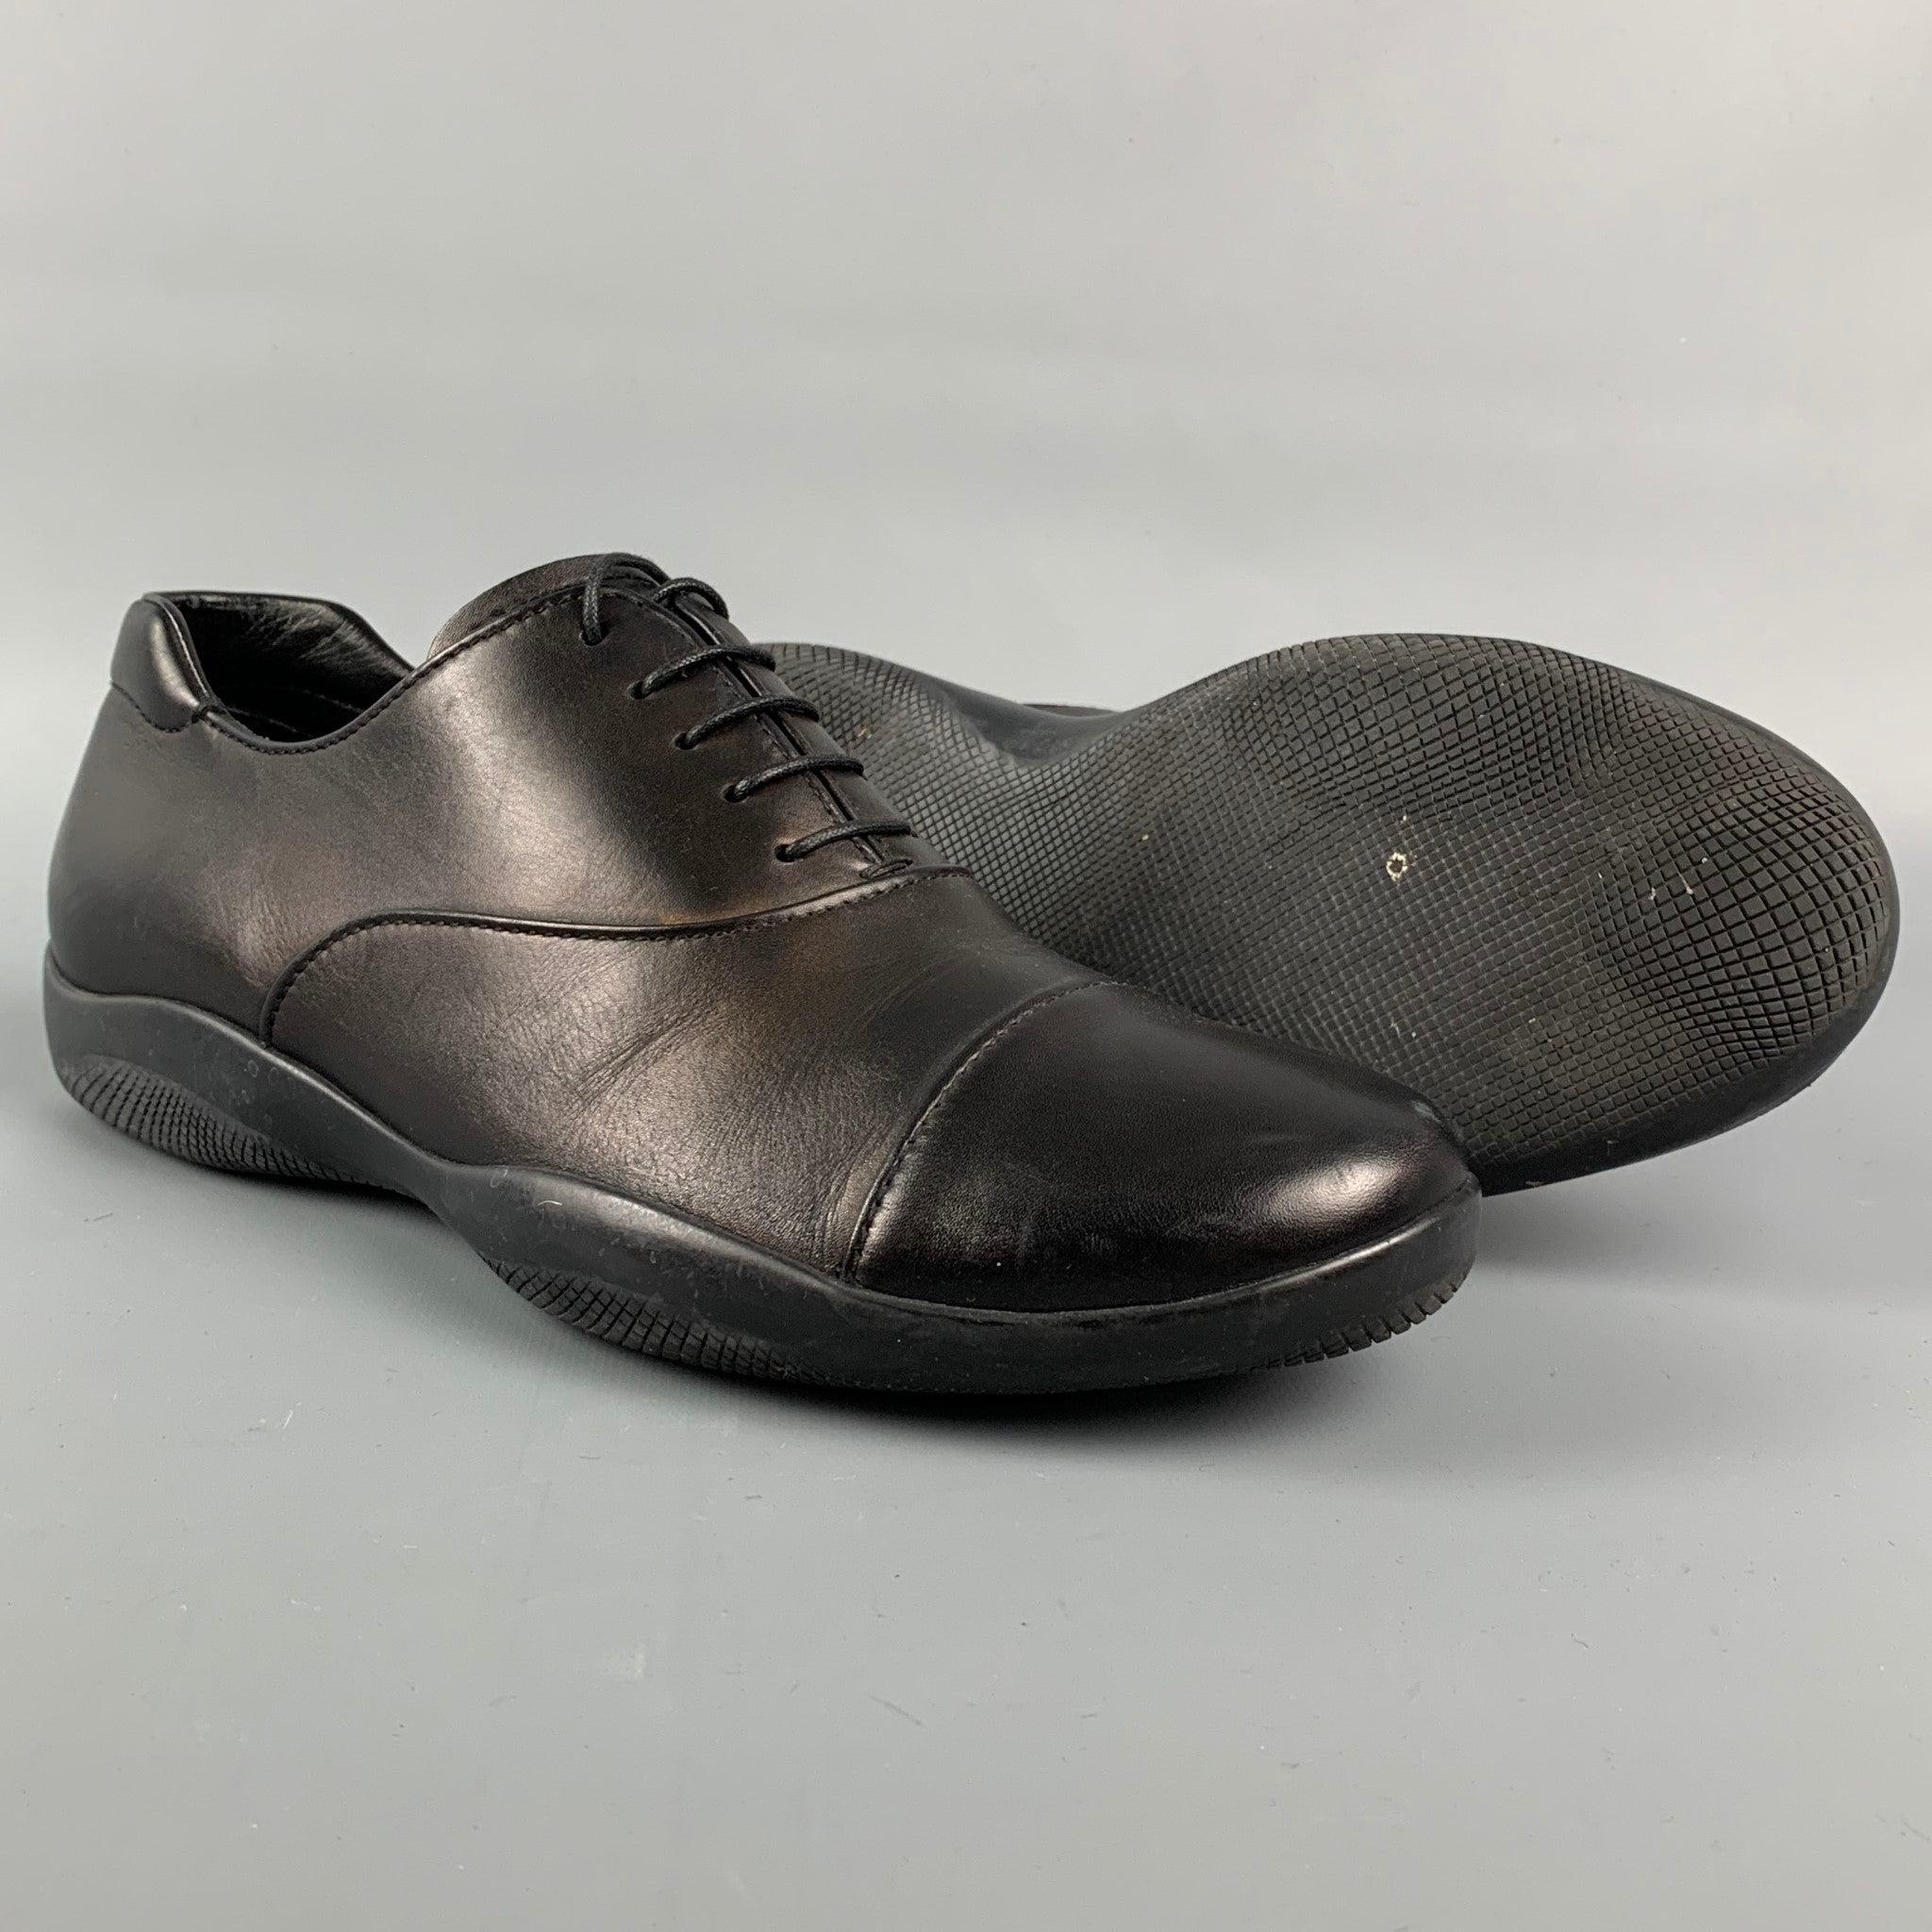 PRADA SPORT Size 6.5 Black Leather Cap Toe Lace Up Shoes In Good Condition For Sale In San Francisco, CA